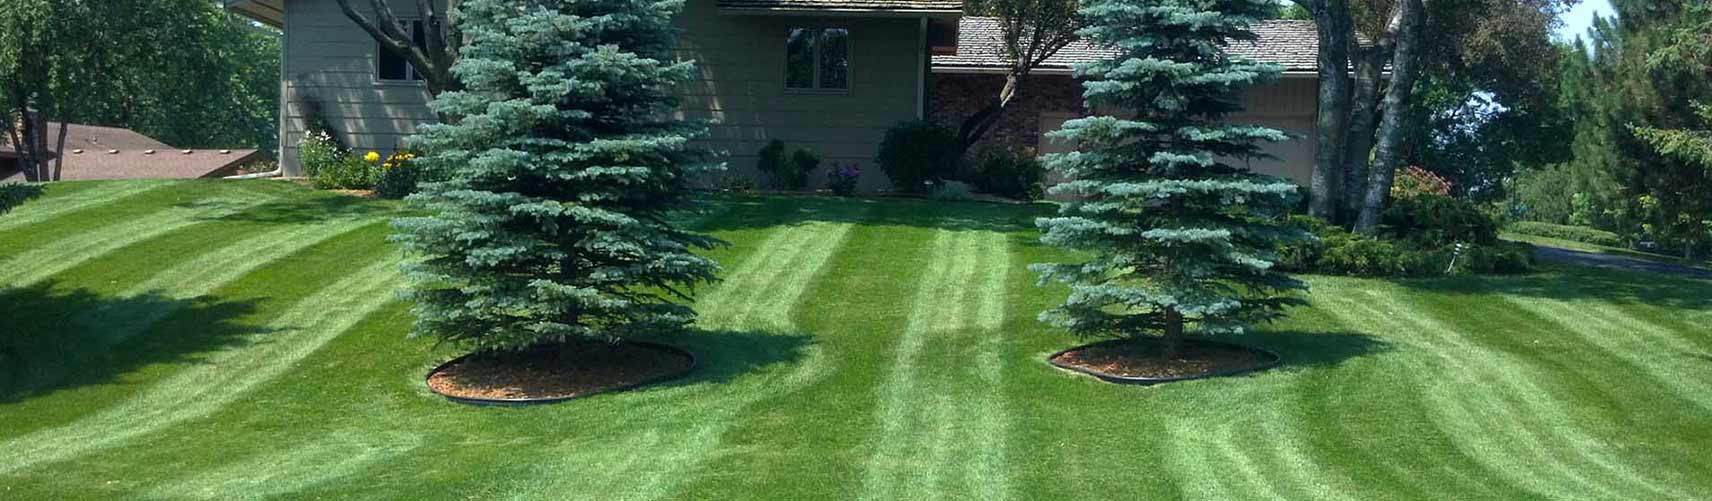 Saint Paul Lawn Care Services, Landscaping Company and Lawn Mowing Service